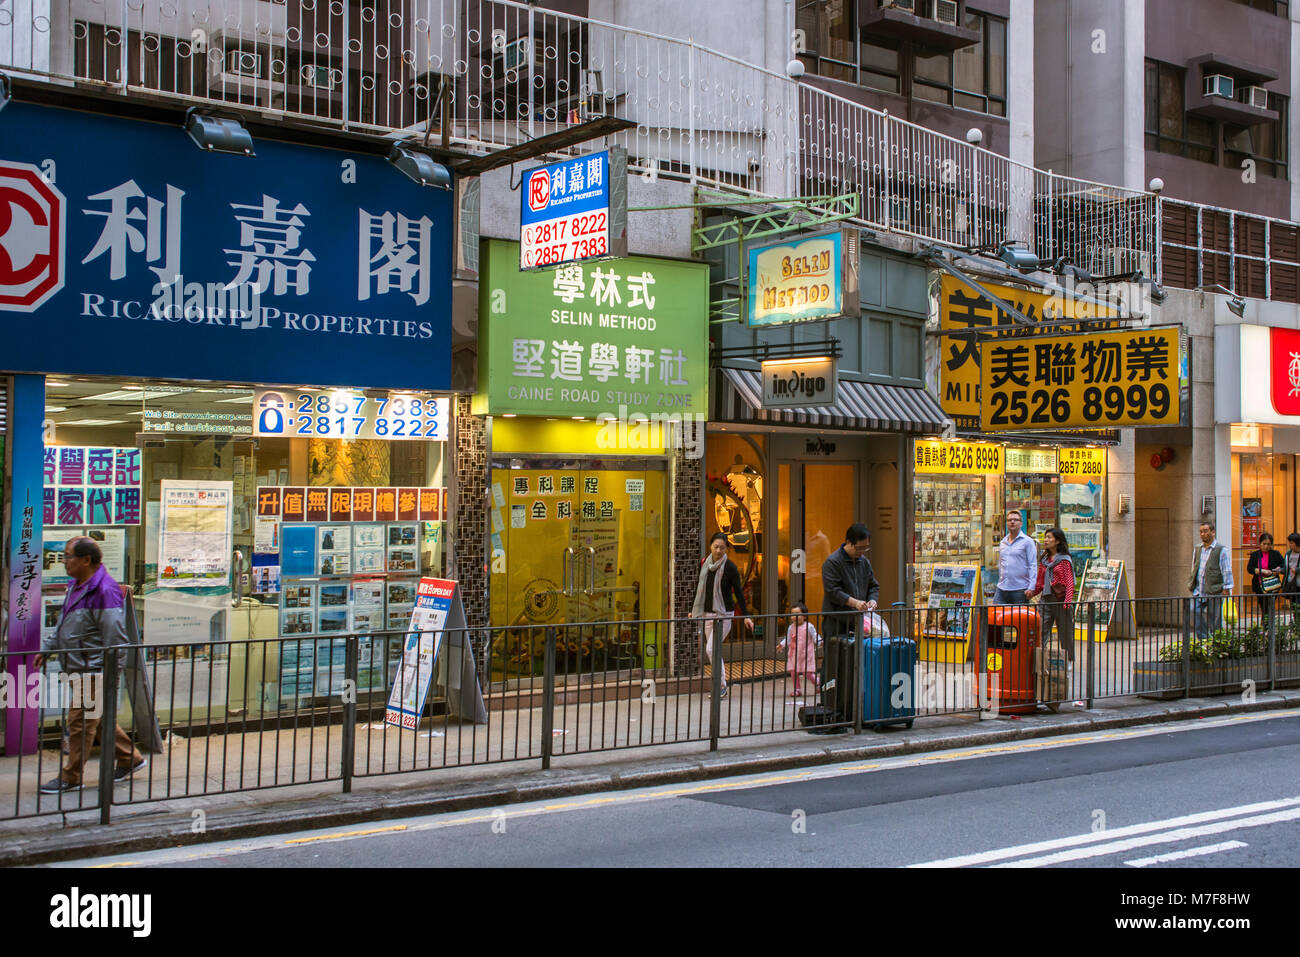 Caine Road, Midlevels, Hong Kong Stock Photo